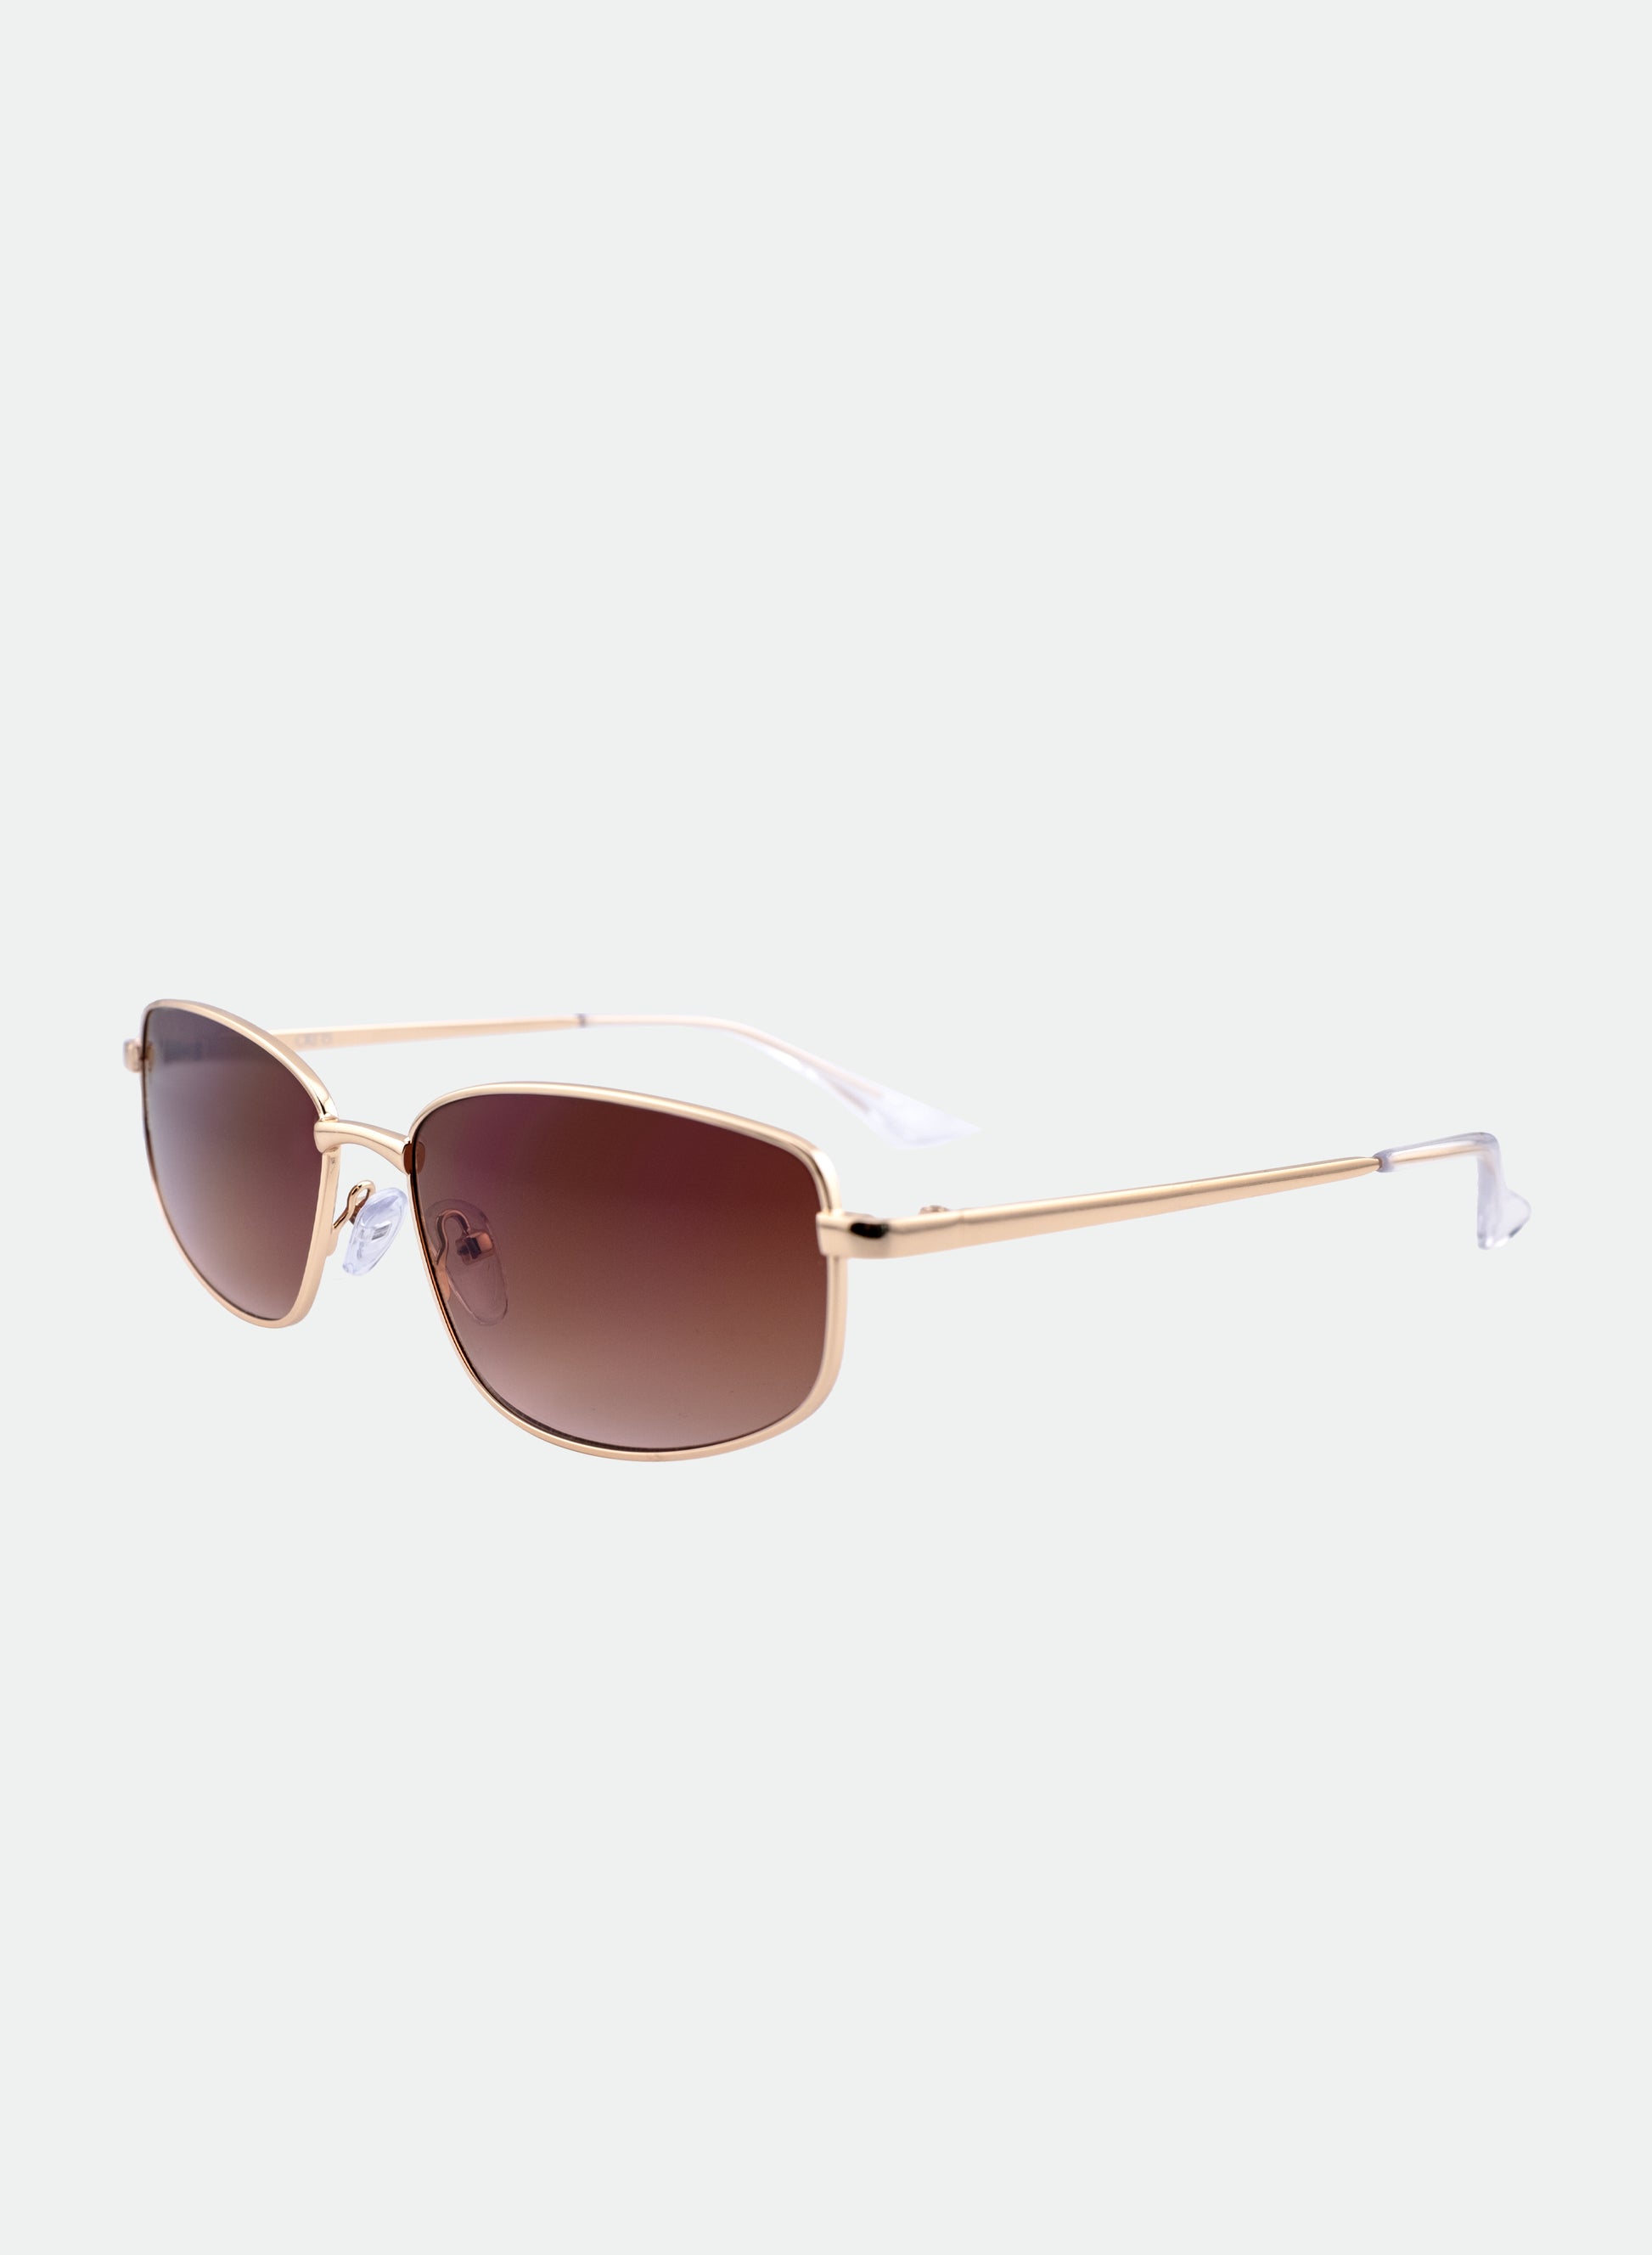 Willow sunglasses in brown side view 